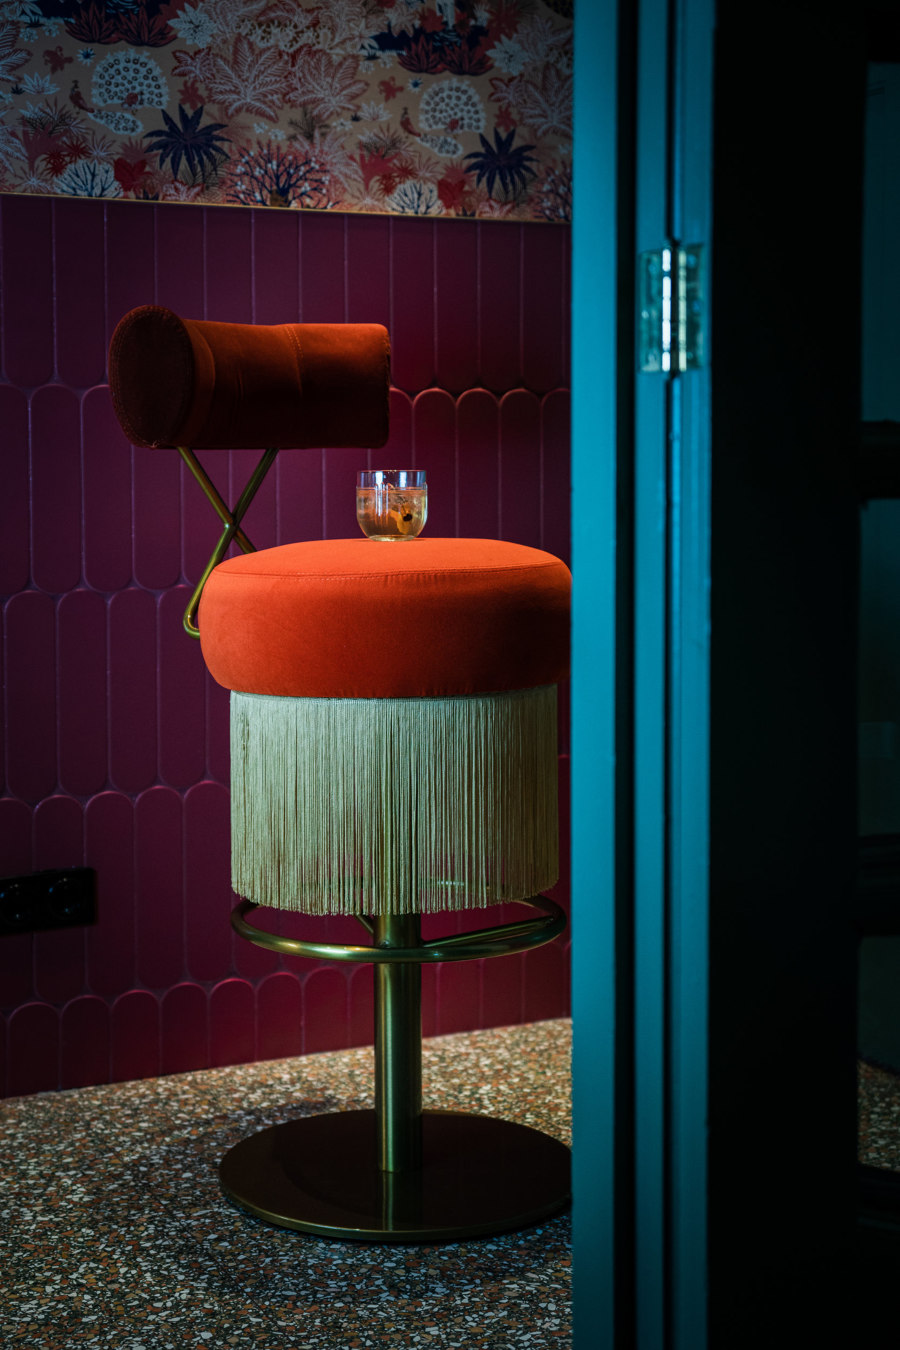 Satelliet Originals: furnishing hospitality with flair | Novedades